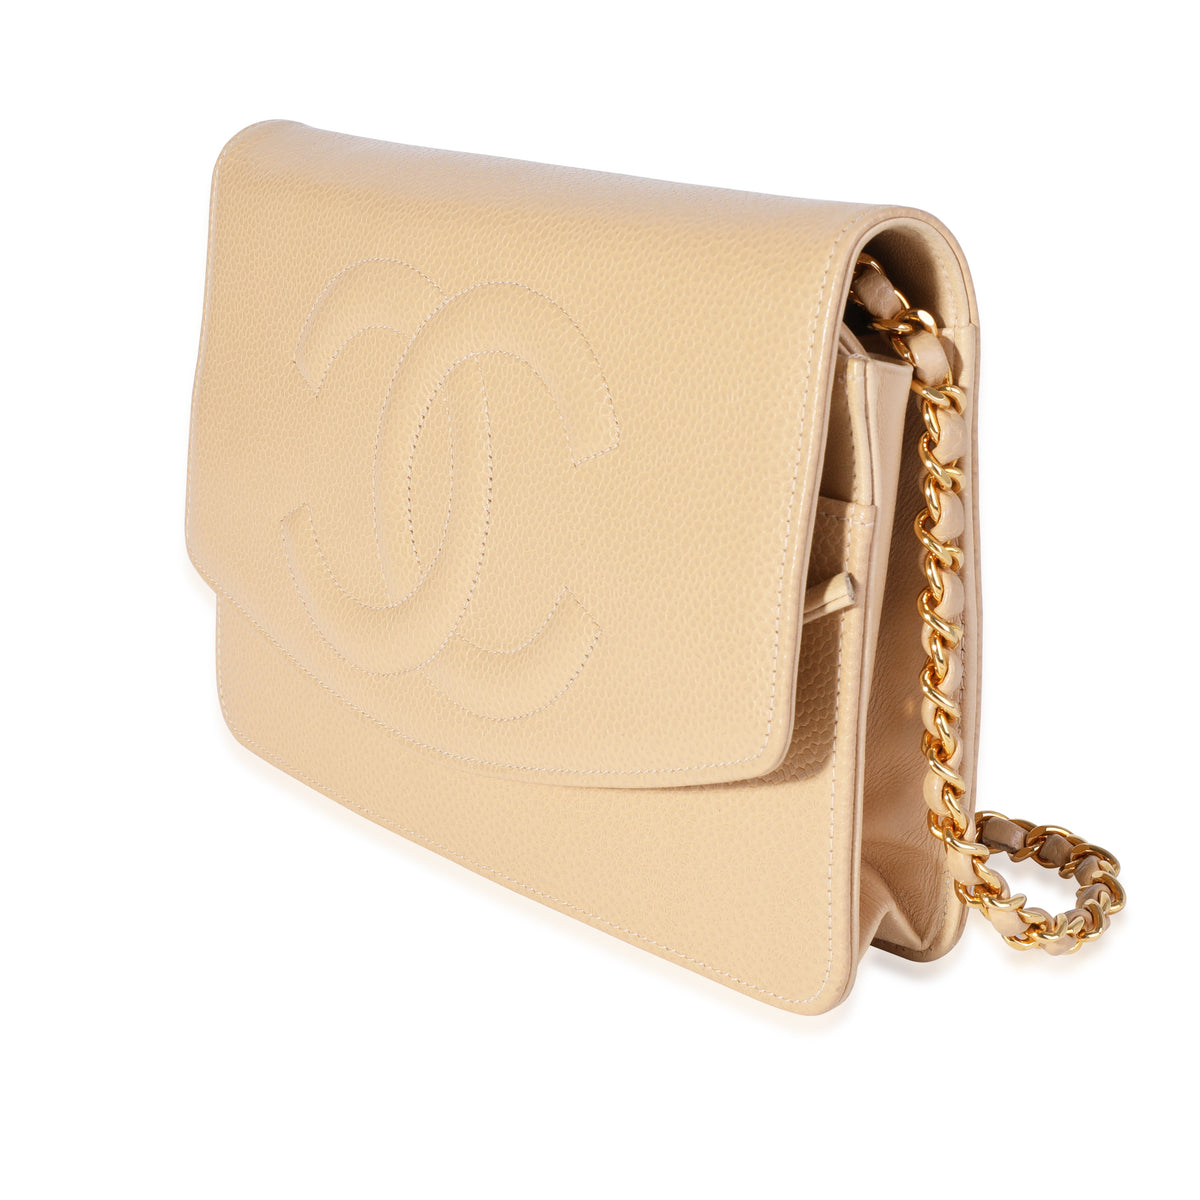 Chanel - Authenticated Timeless/Classique Wallet - Leather Beige Plain for Women, Never Worn, with Tag